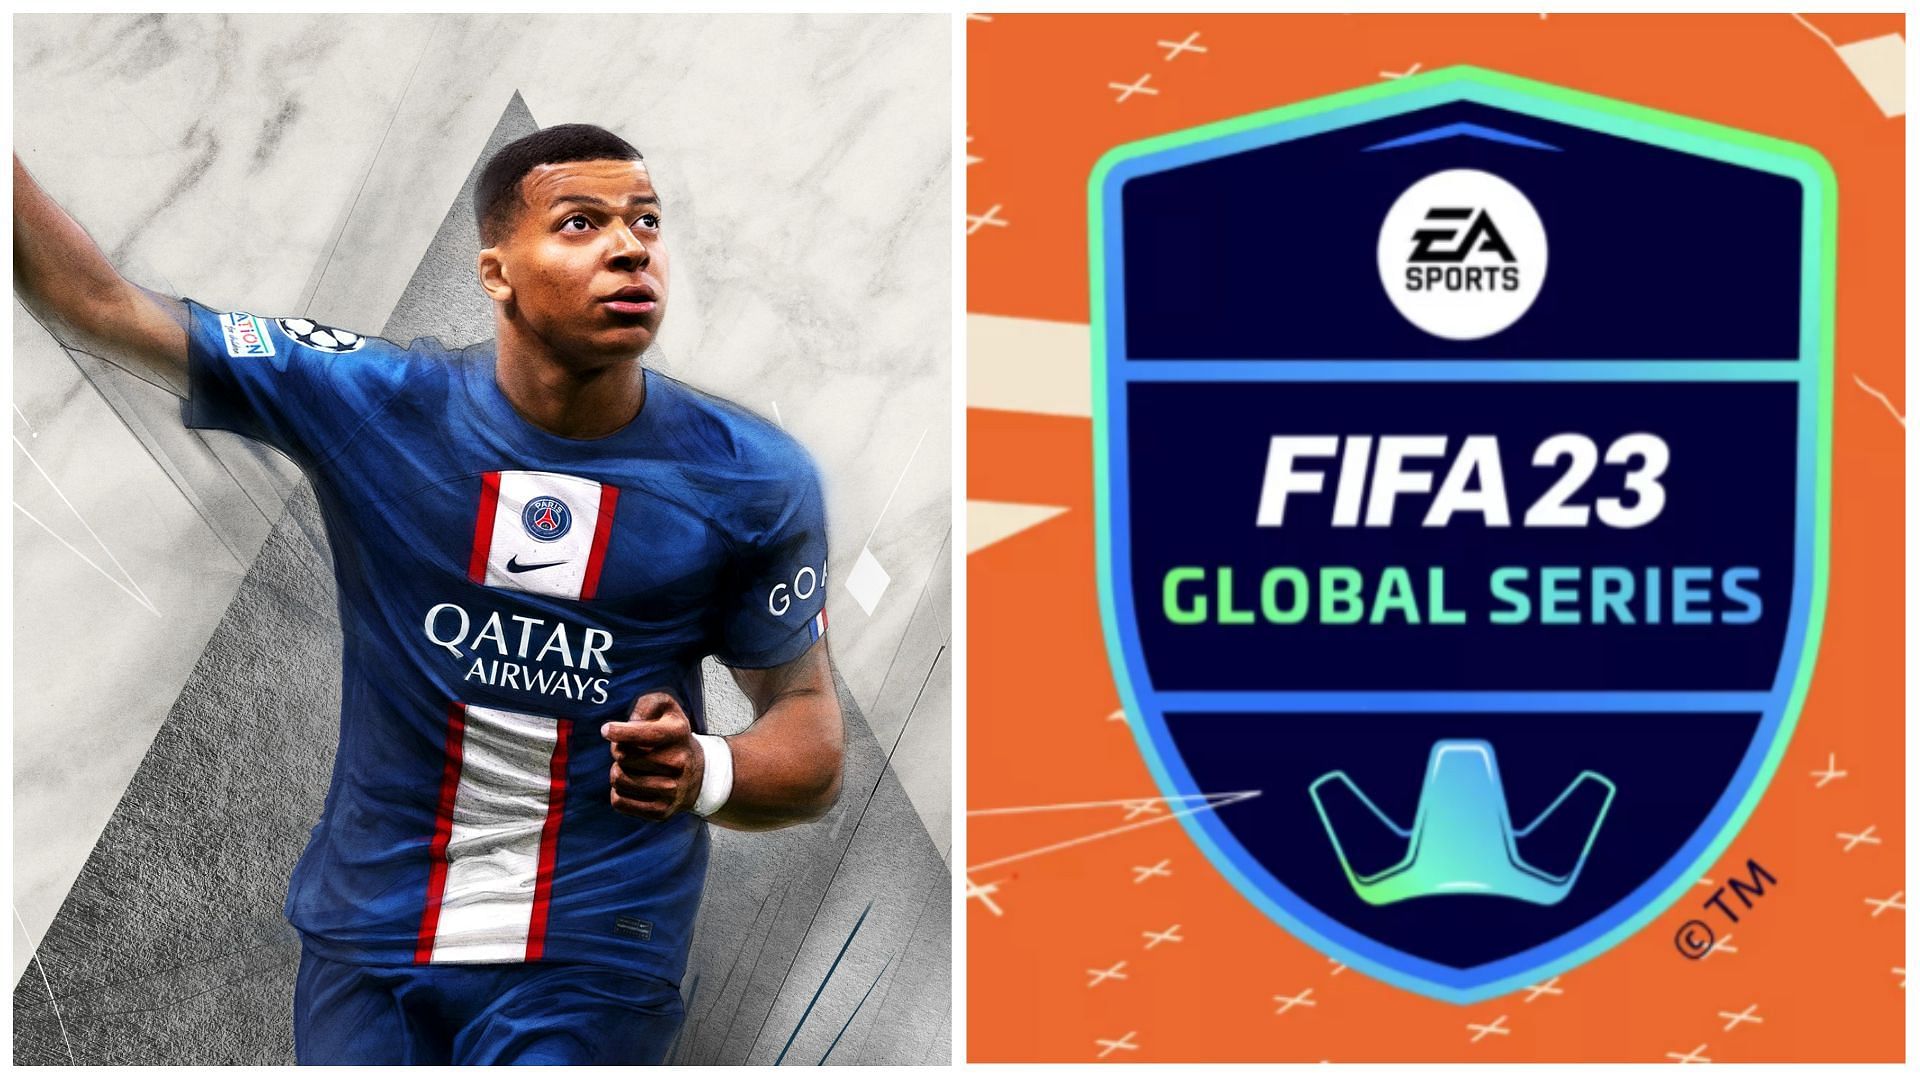 The competitive season for FIFA 23 is underway (Images via EA Sports)